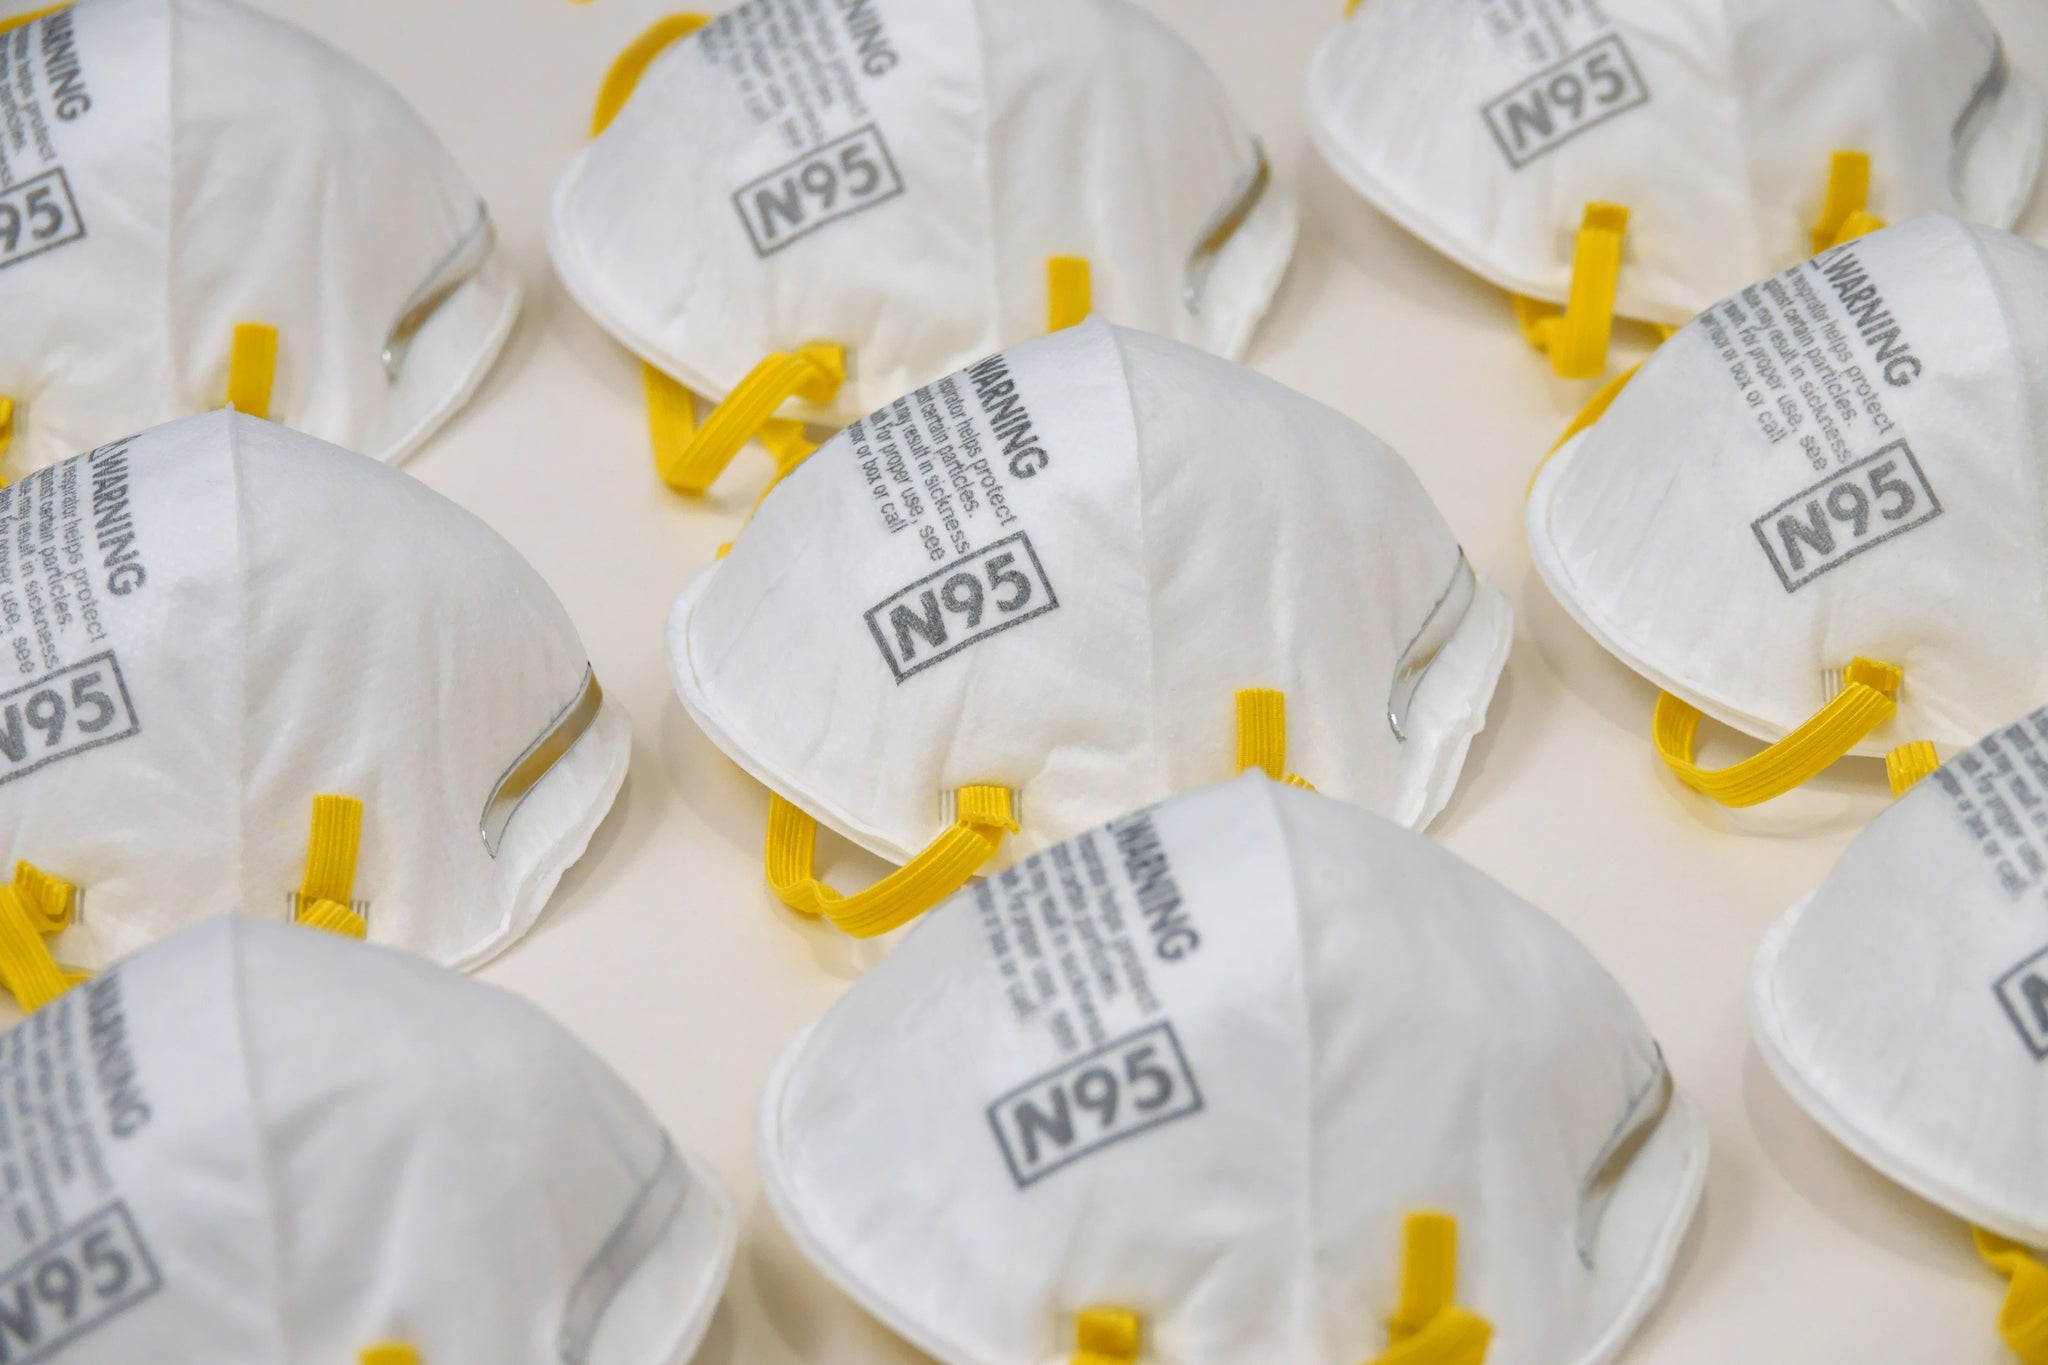 What Doctors Wish Patients Knew About Wearing N95 Masks